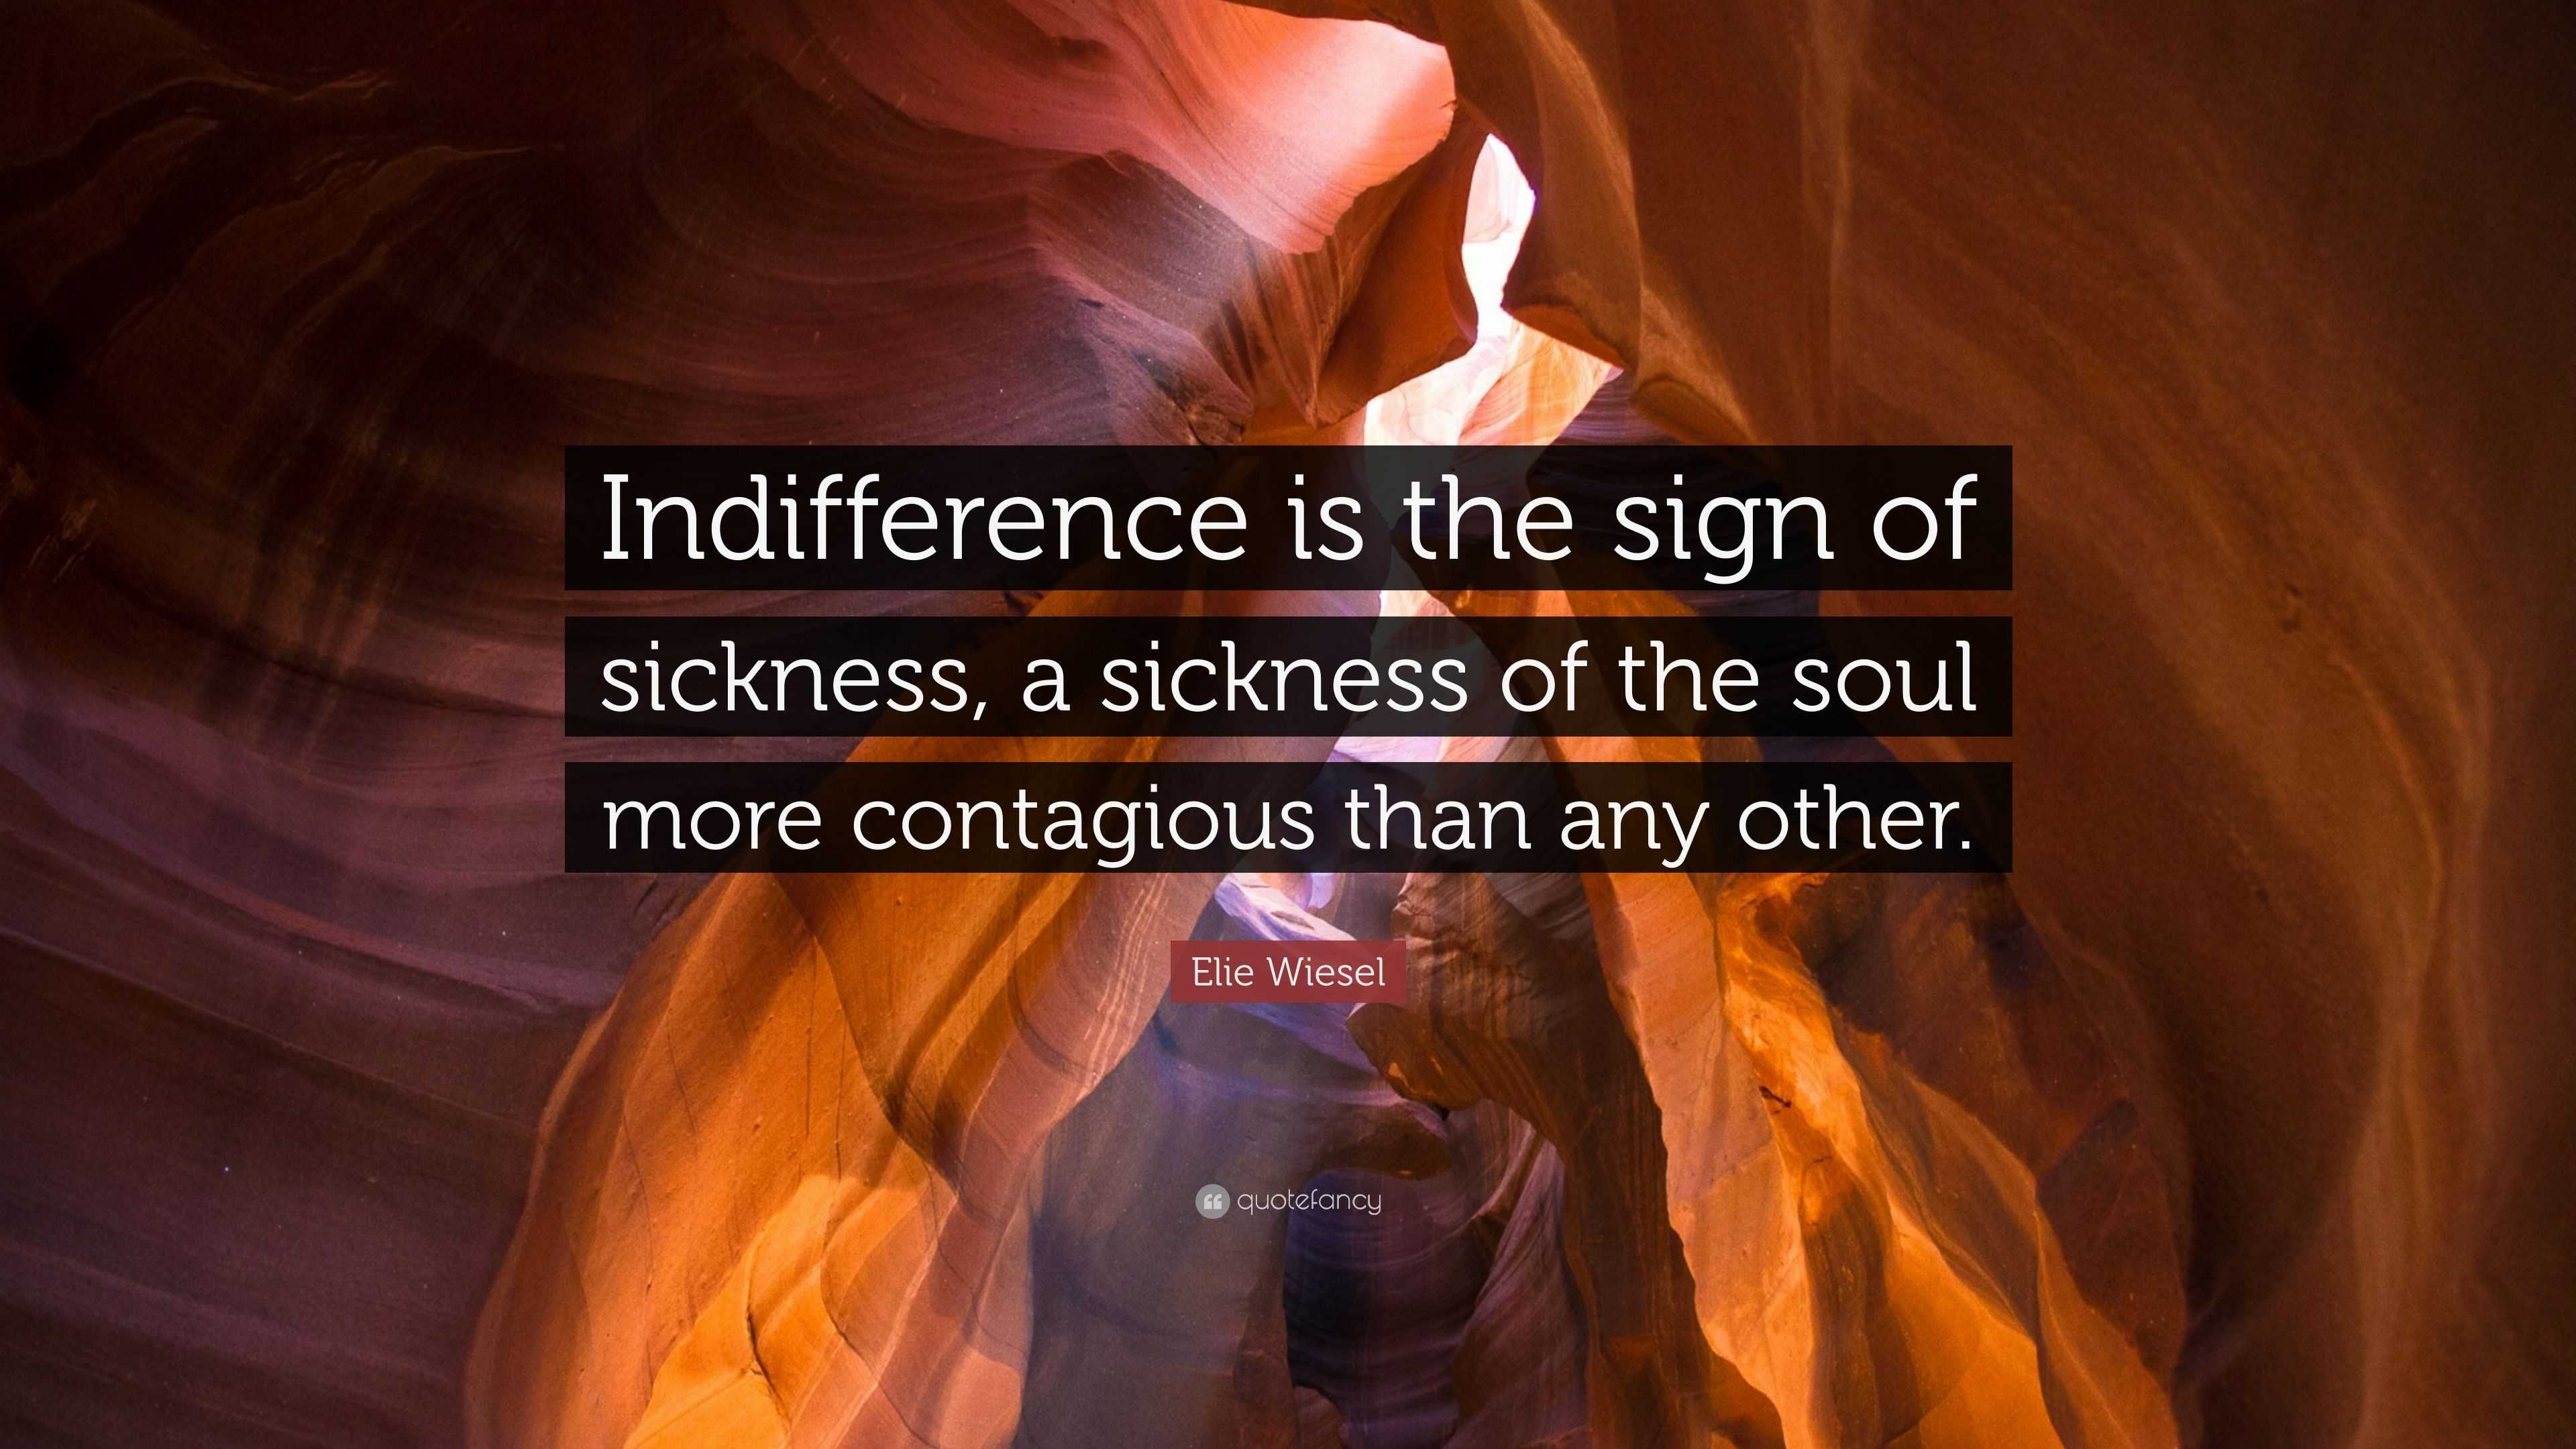 Elie Wiesel Quote: "Indifference is the sign of sickness, a sickness of the soul more contagious ...